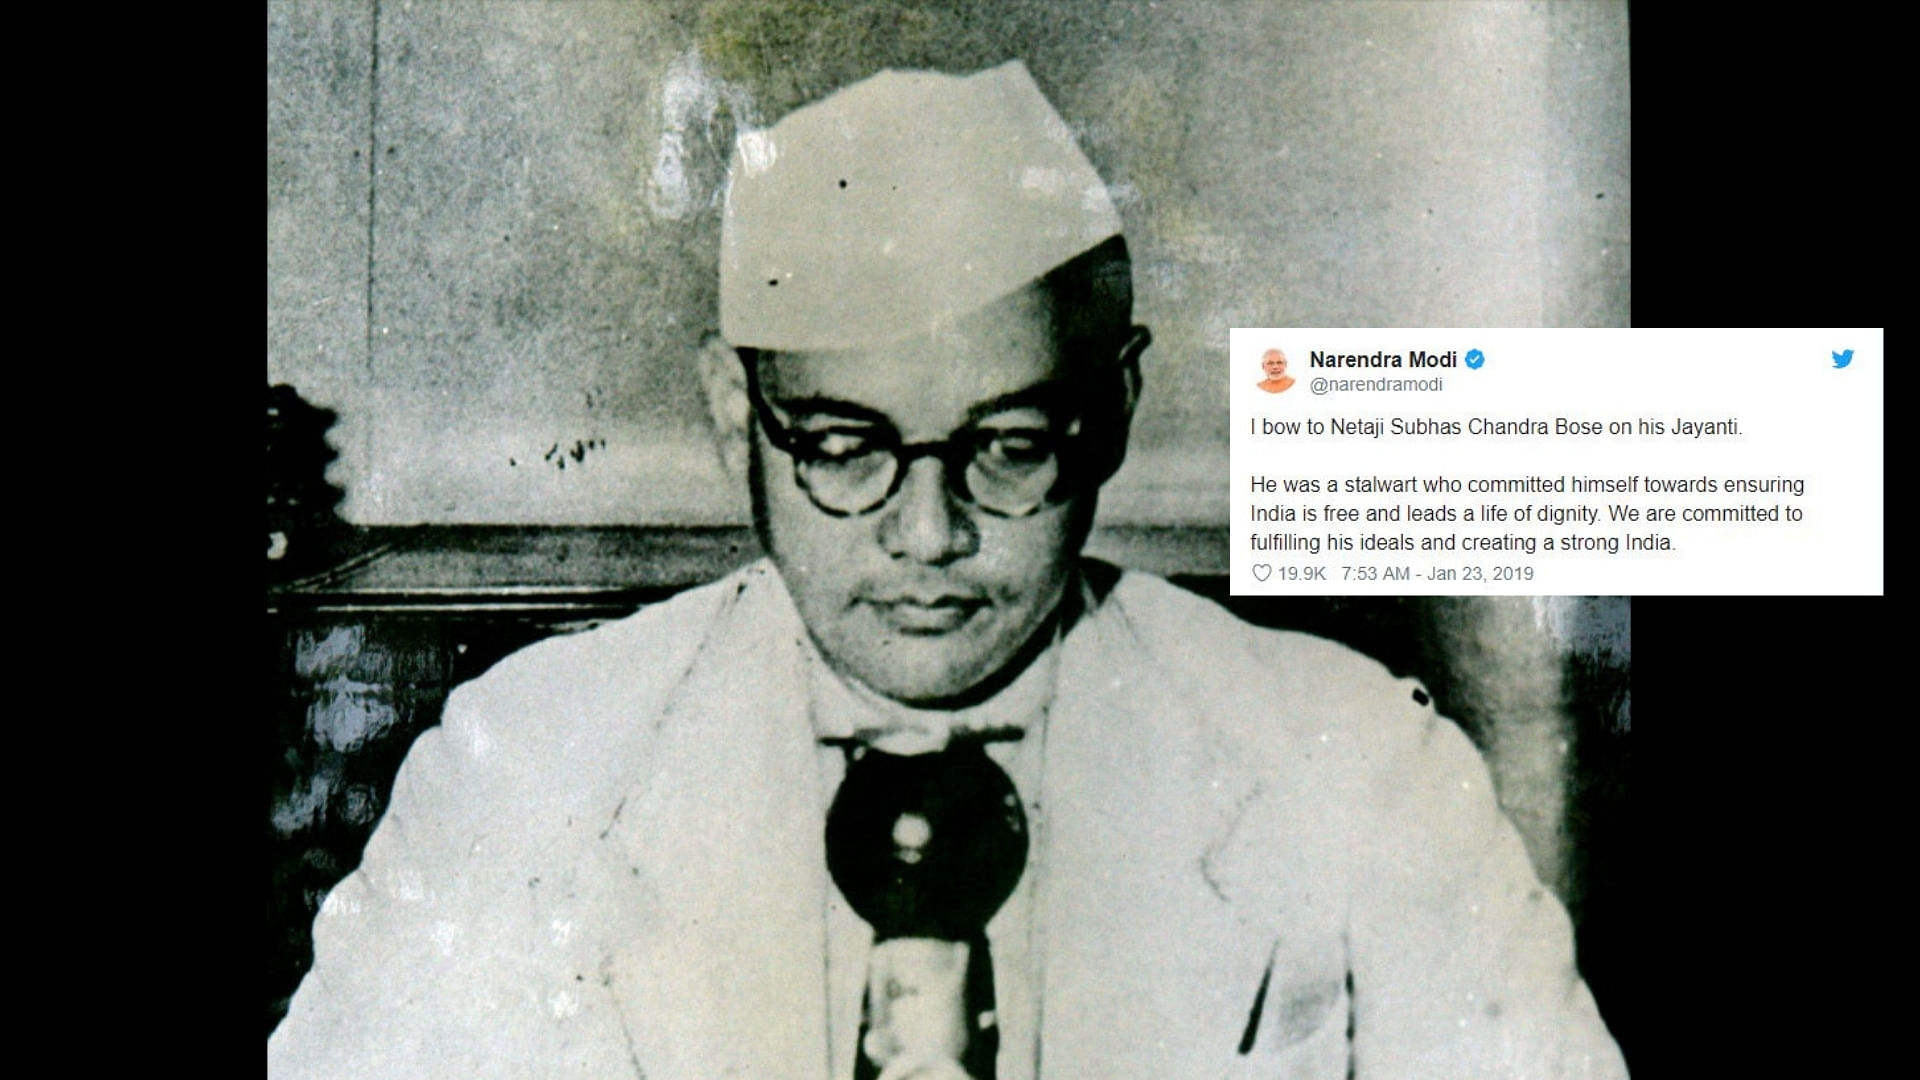 Subhas Chandra Bose was made the president of the Congress in 1938.